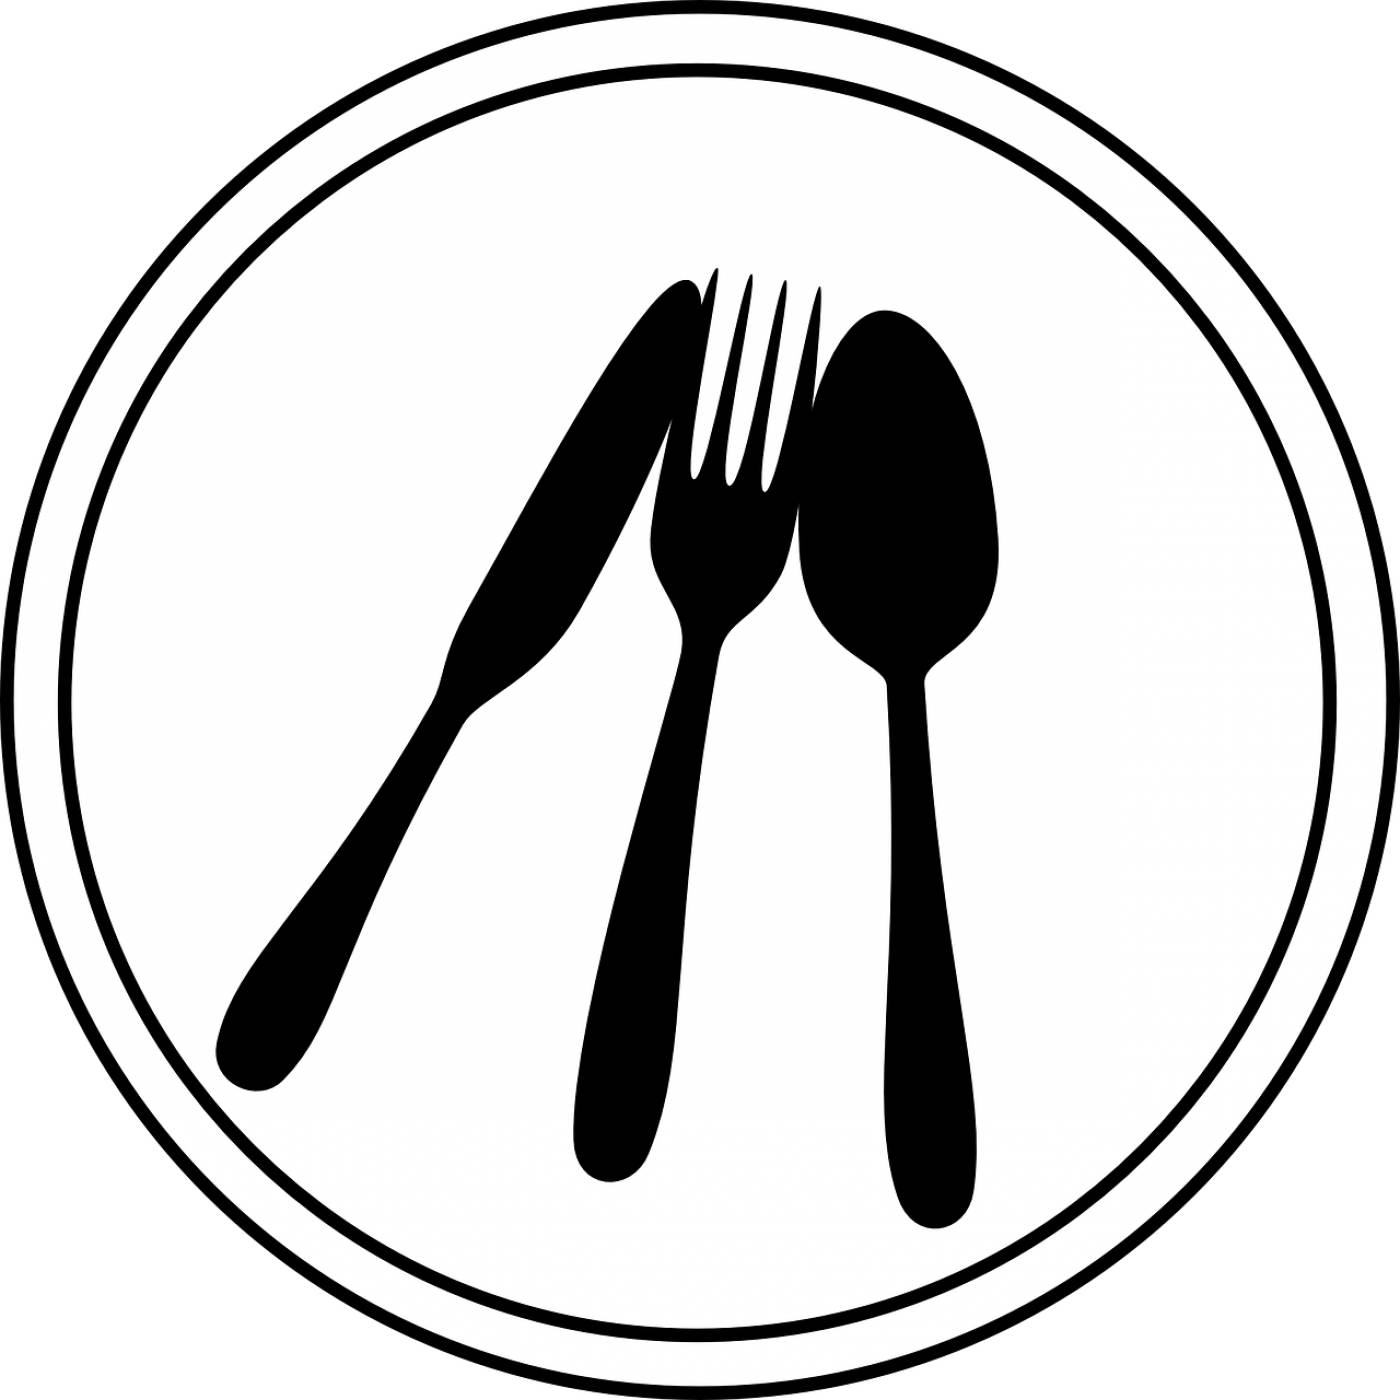 place setting silverware tableware  svg vector